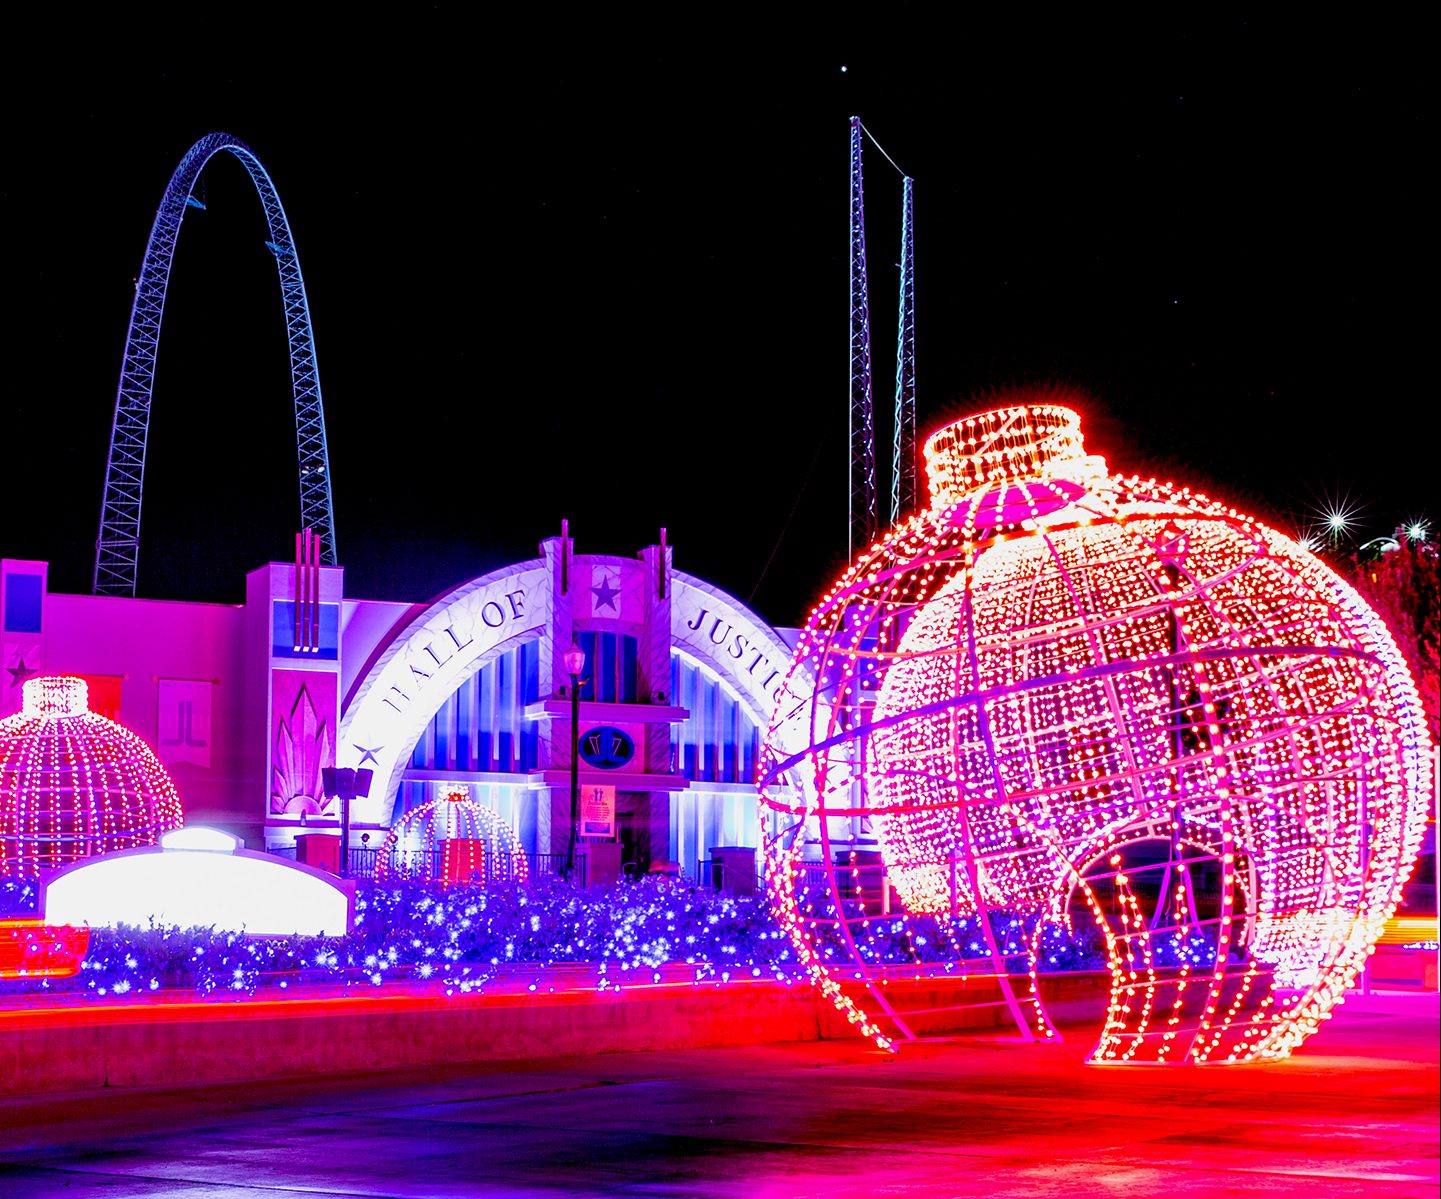 Stroll Amongst Millions Of Twinkling Lights At The Six Flags 'Holiday